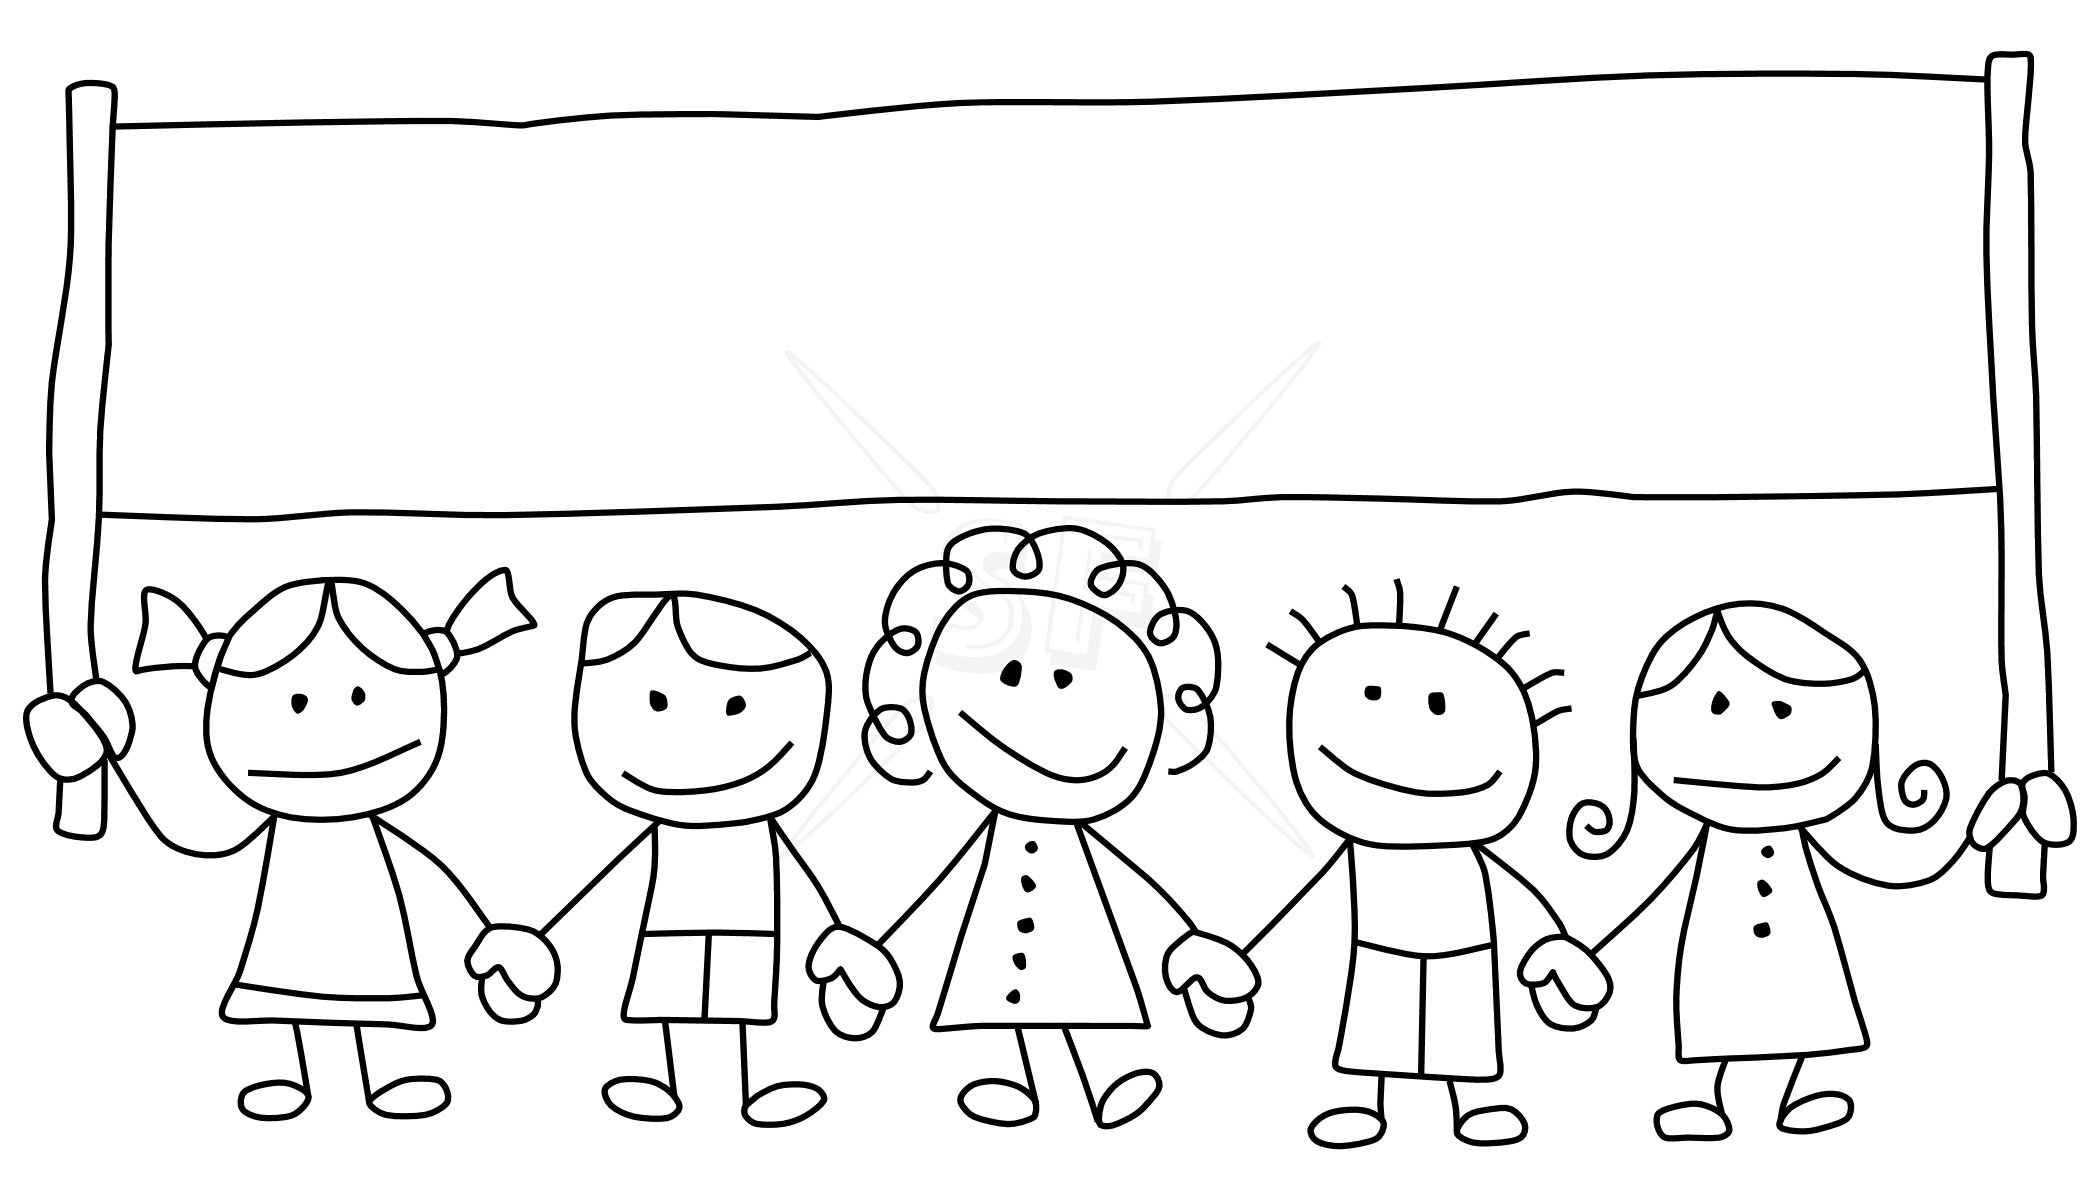 Family  black and white family clipart black and white 5 people 4